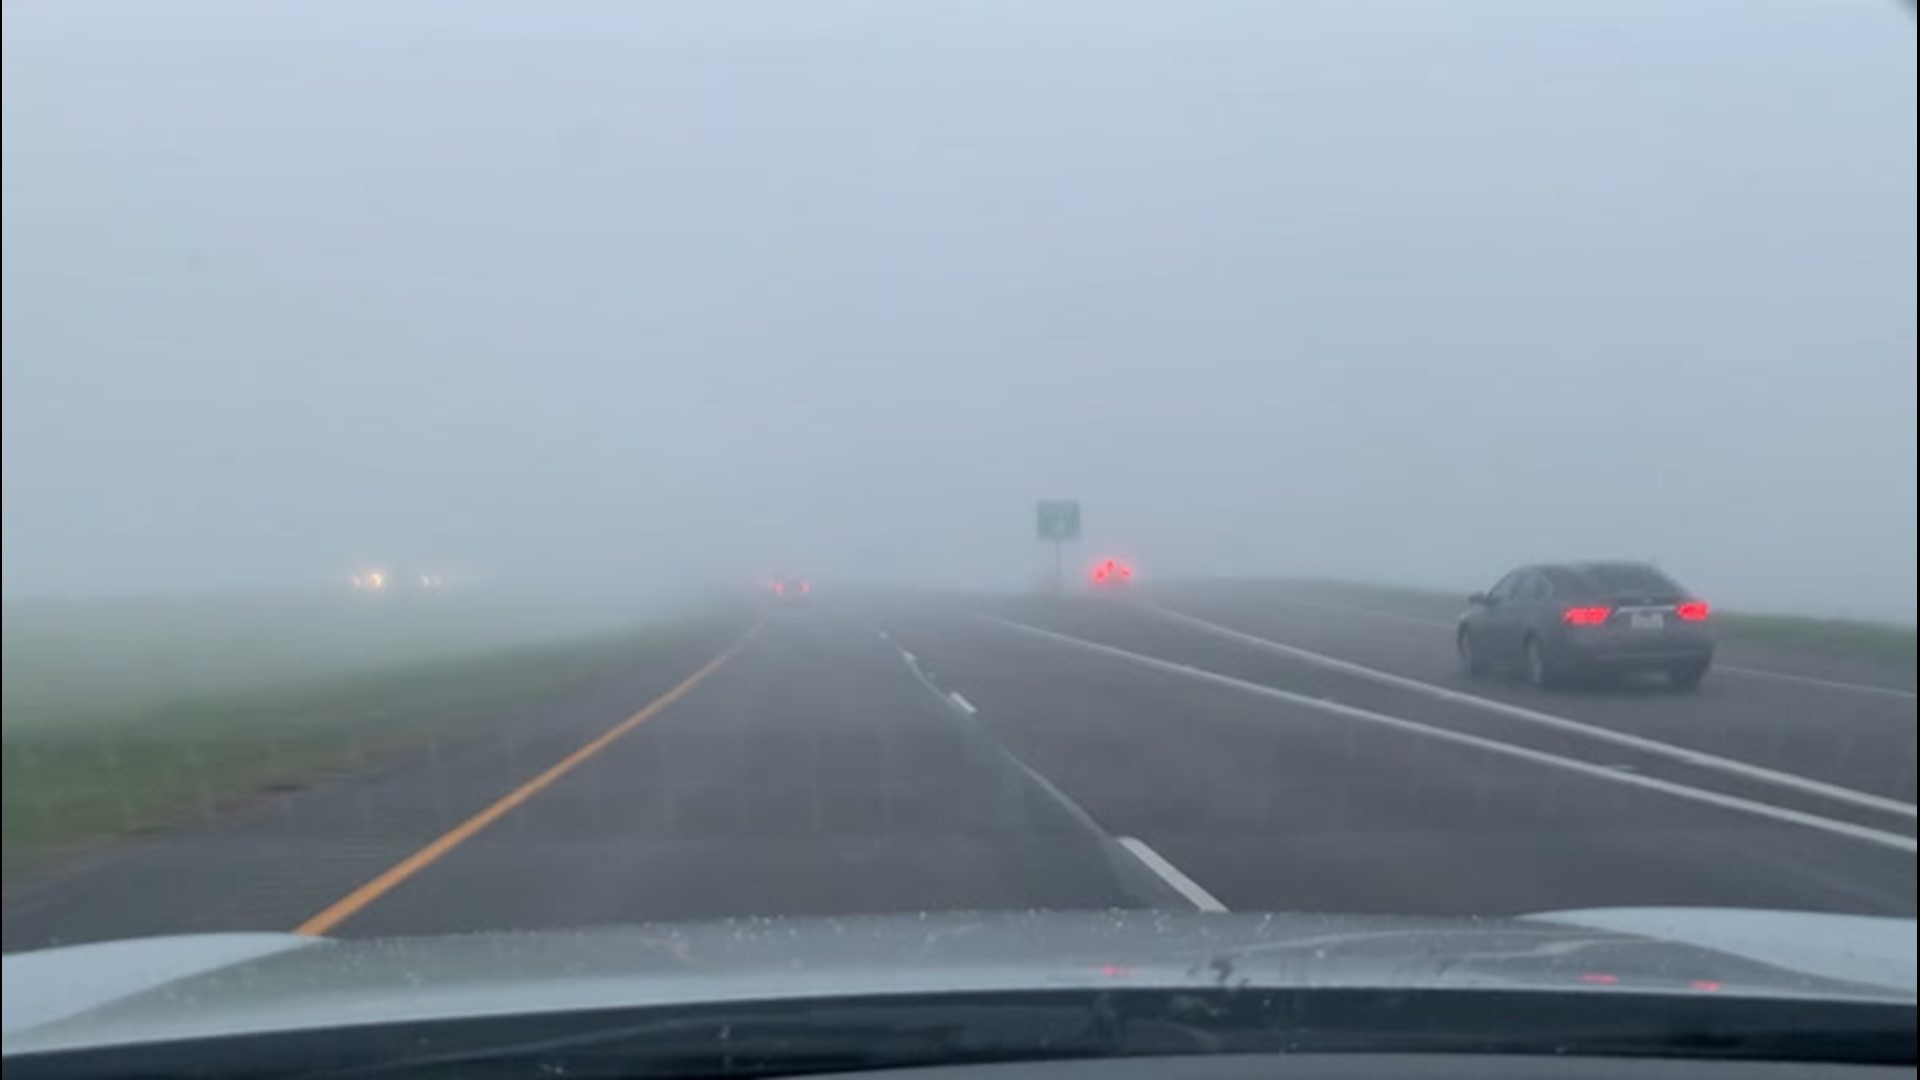 Foggy conditions and low visibility were recorded on US 287 in Mansfield, Texas (south side of DFW metroplex). A dense fog advisory is up and is slowing the morning commute.